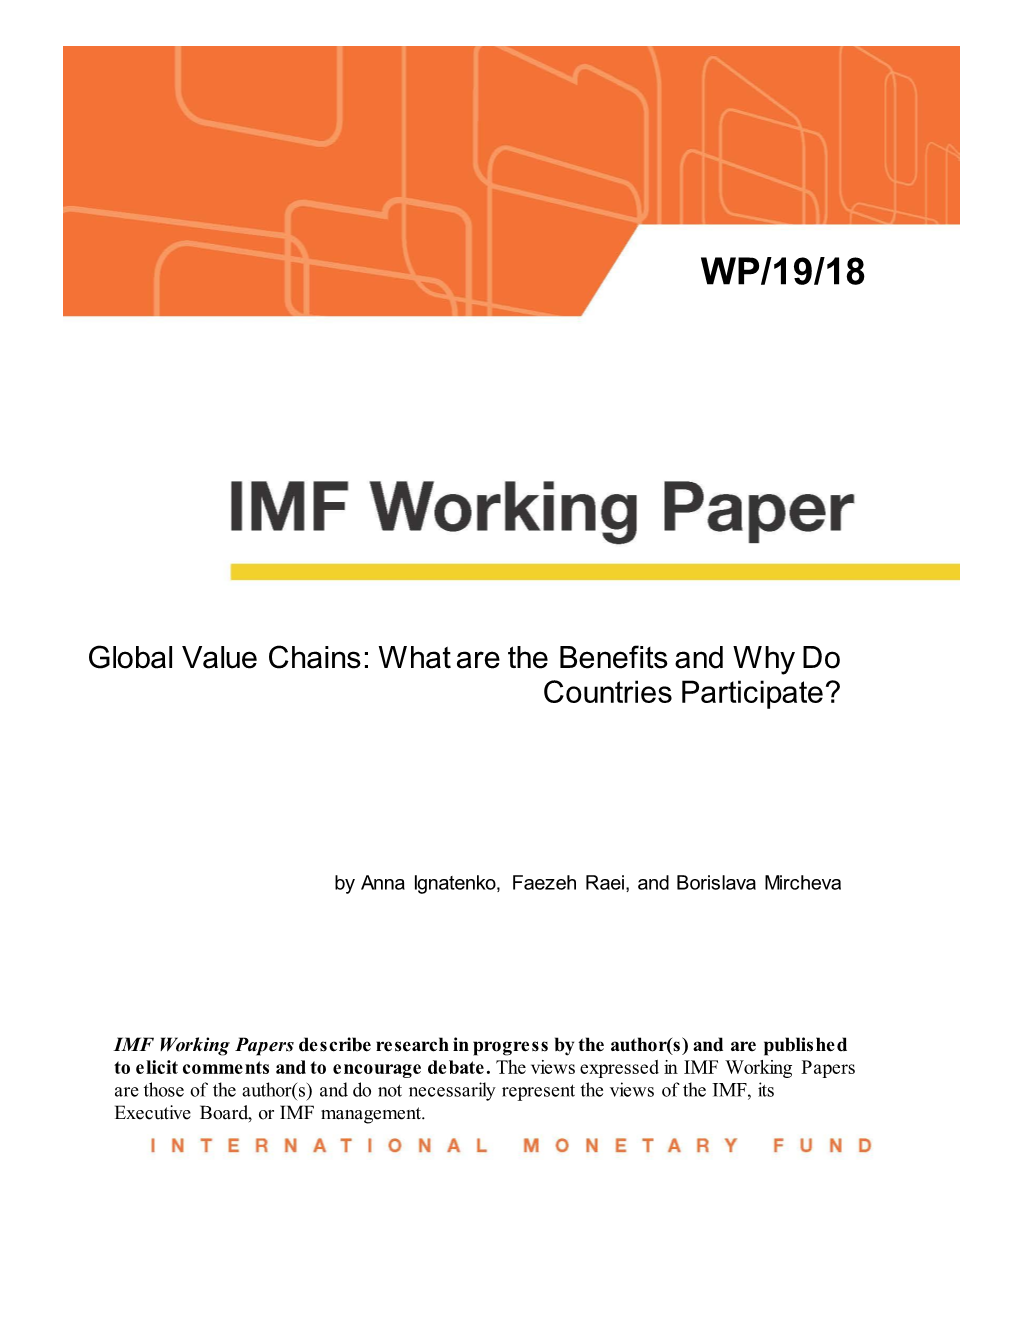 Global Value Chains: What Are the Benefits and Why Do Countries Participate?